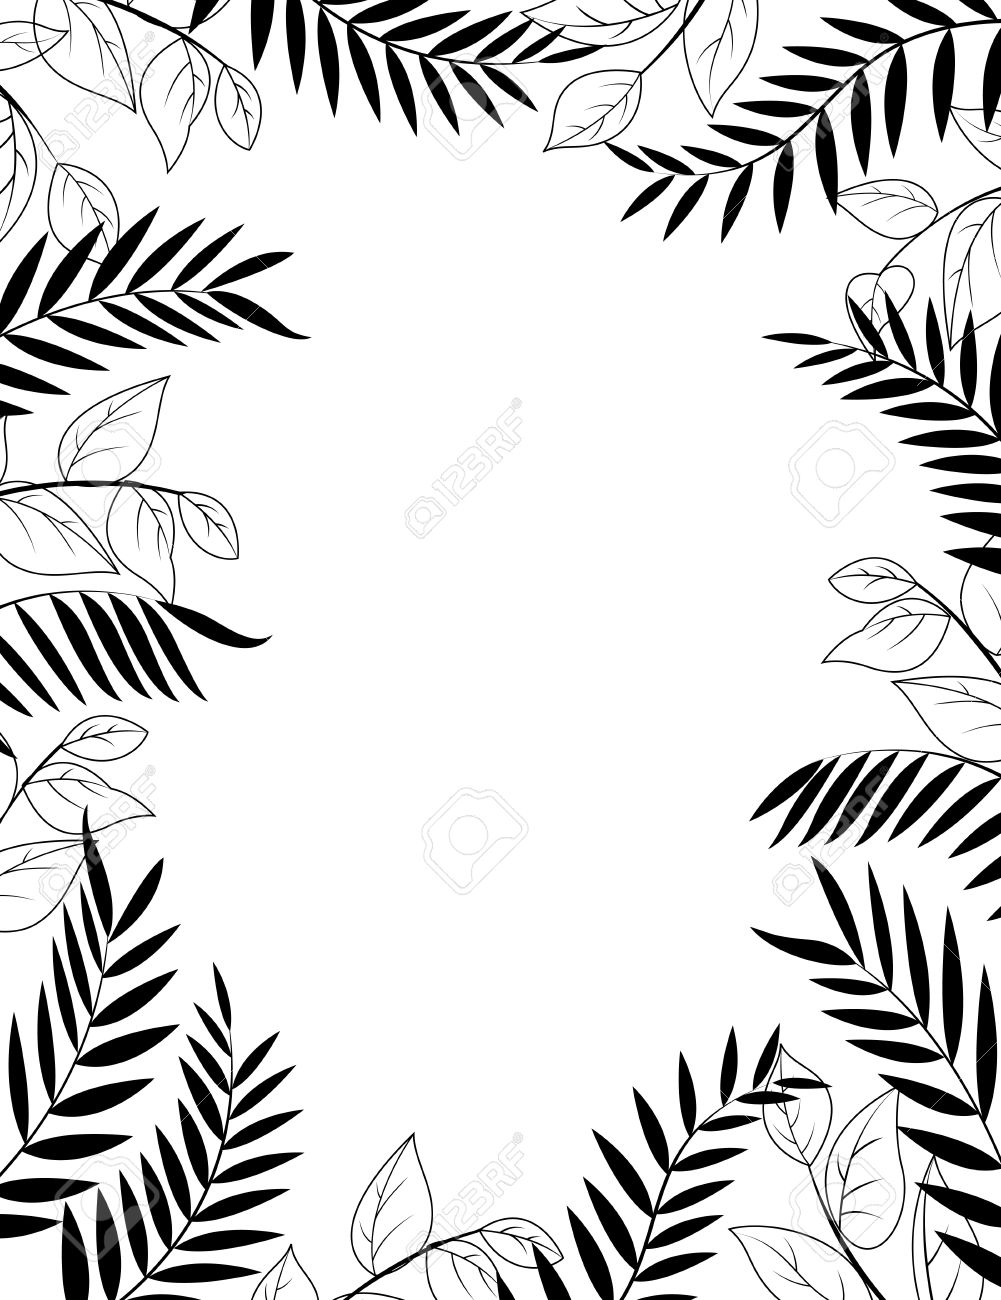 jungle background clipart black and white - Clipground